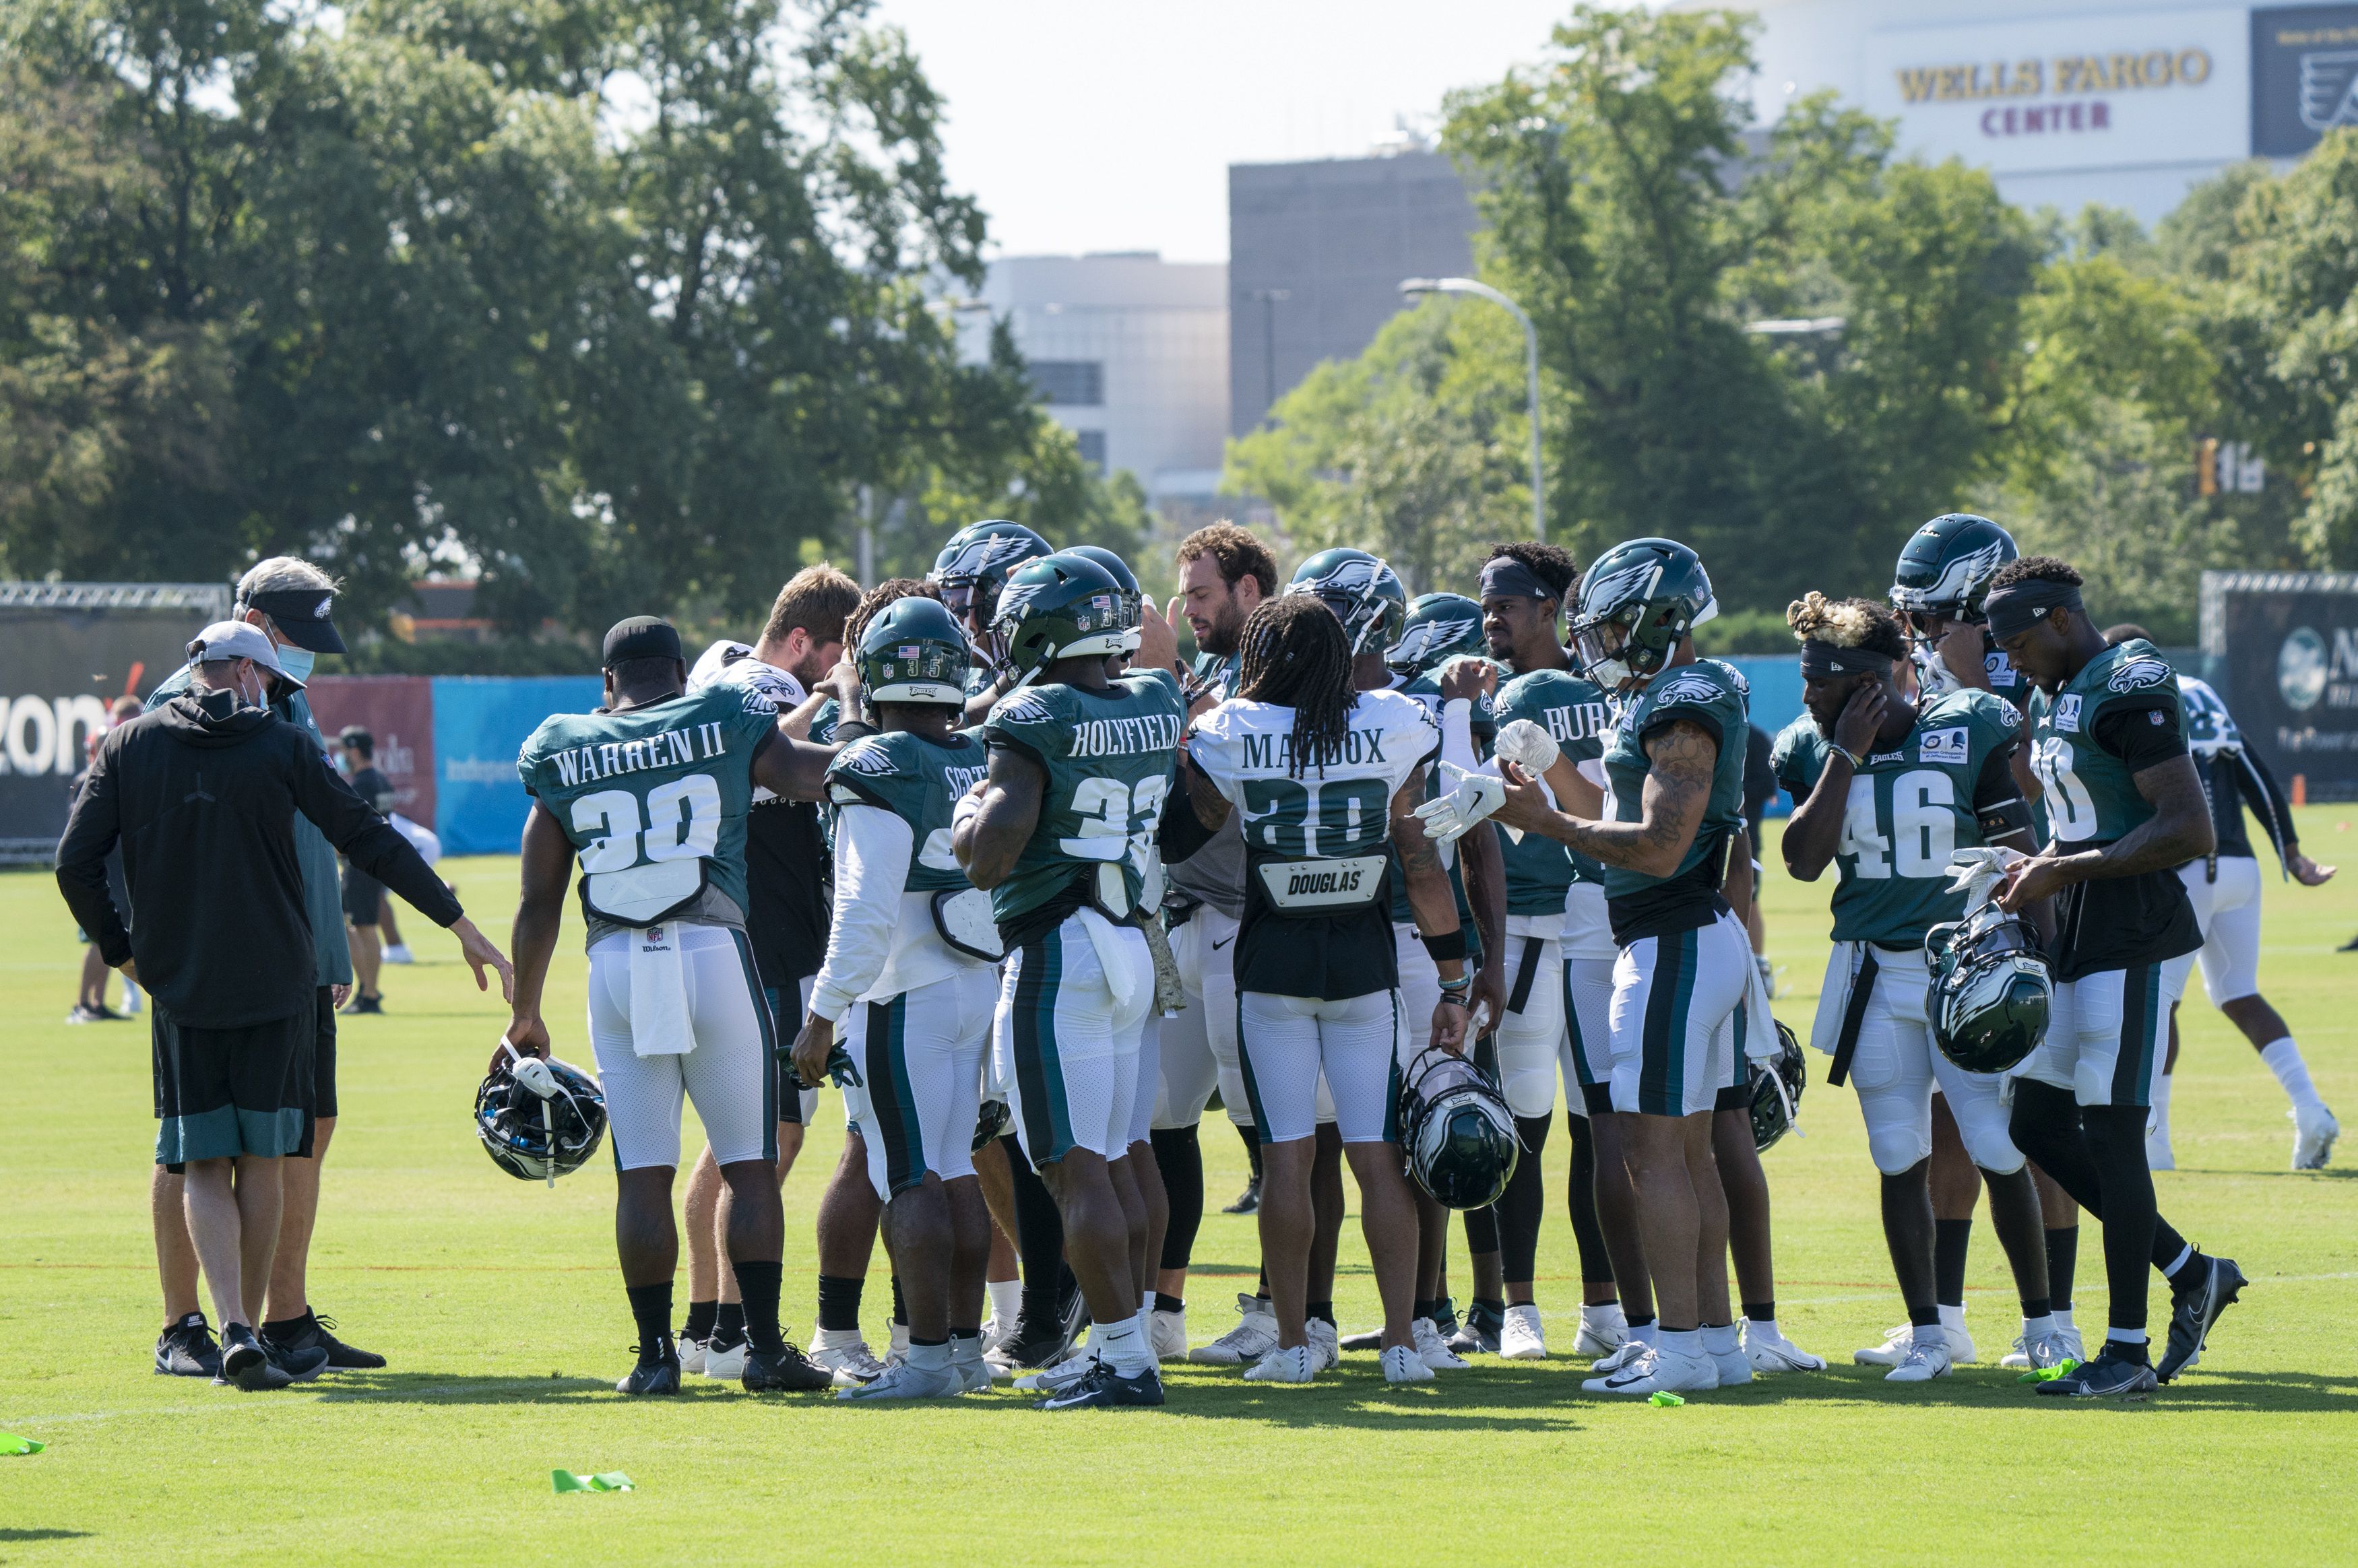 Eagles training camp 2021 observations, Day 3: A physical first few  practices – NBC Sports Philadelphia